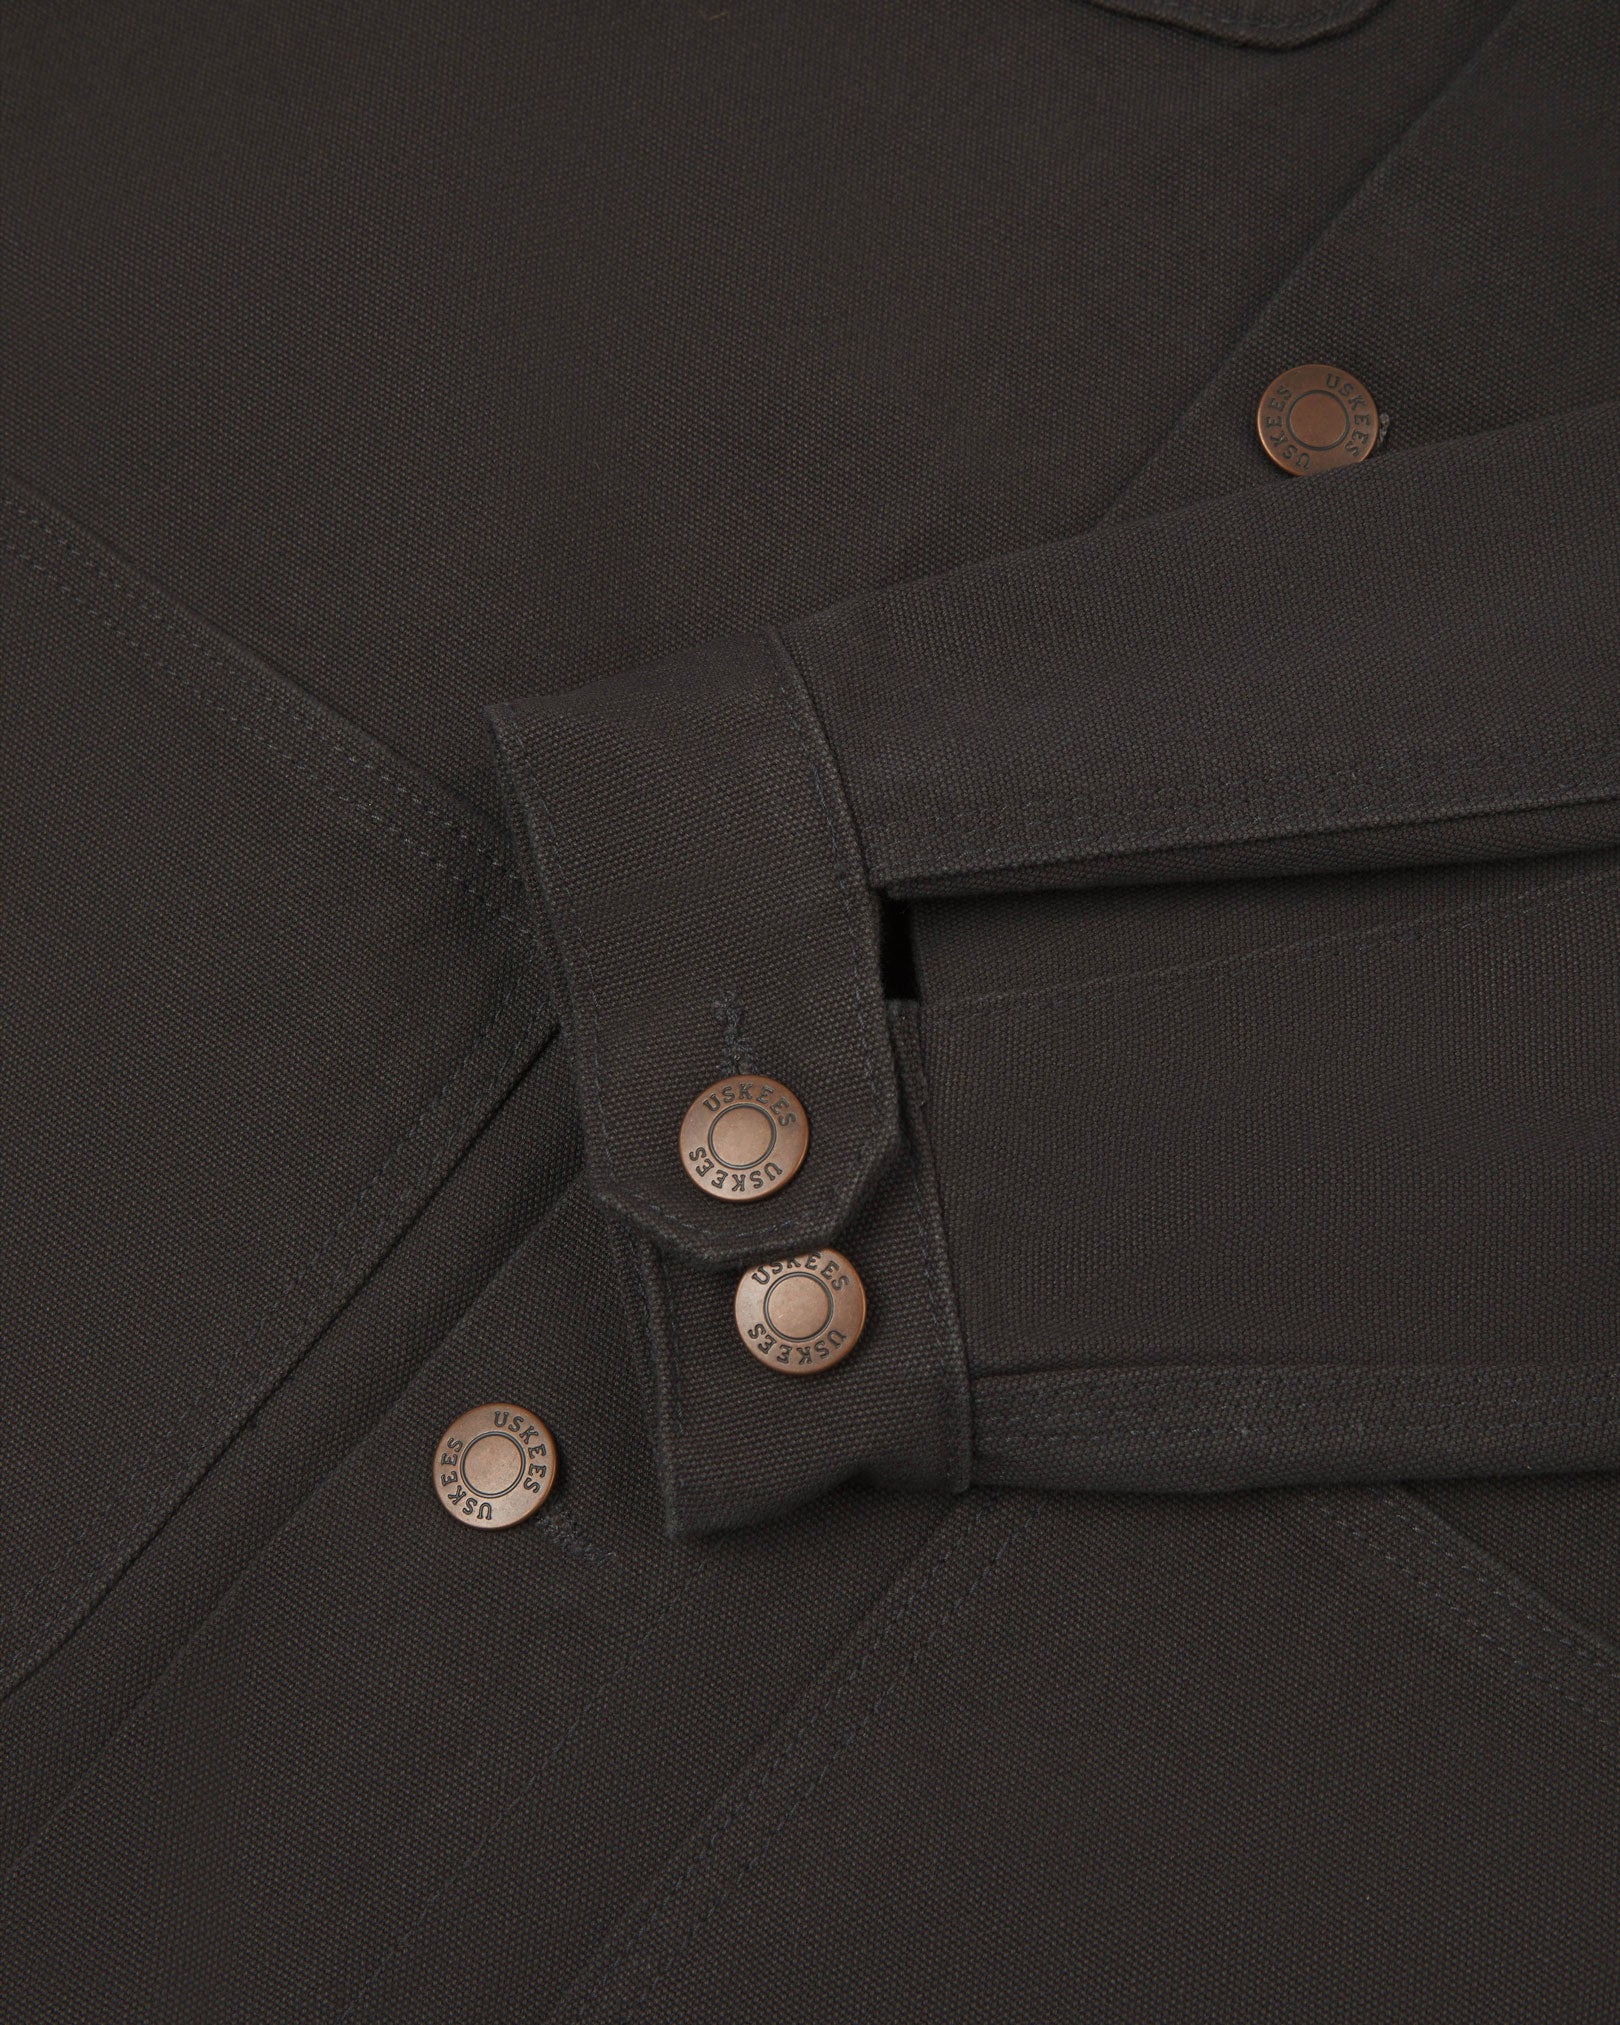 Detail shot of Uskees men's canvas chore jacket in charcoal-grey with a green collar showing the adjustable cuff, sleeve and pockets in close-up 